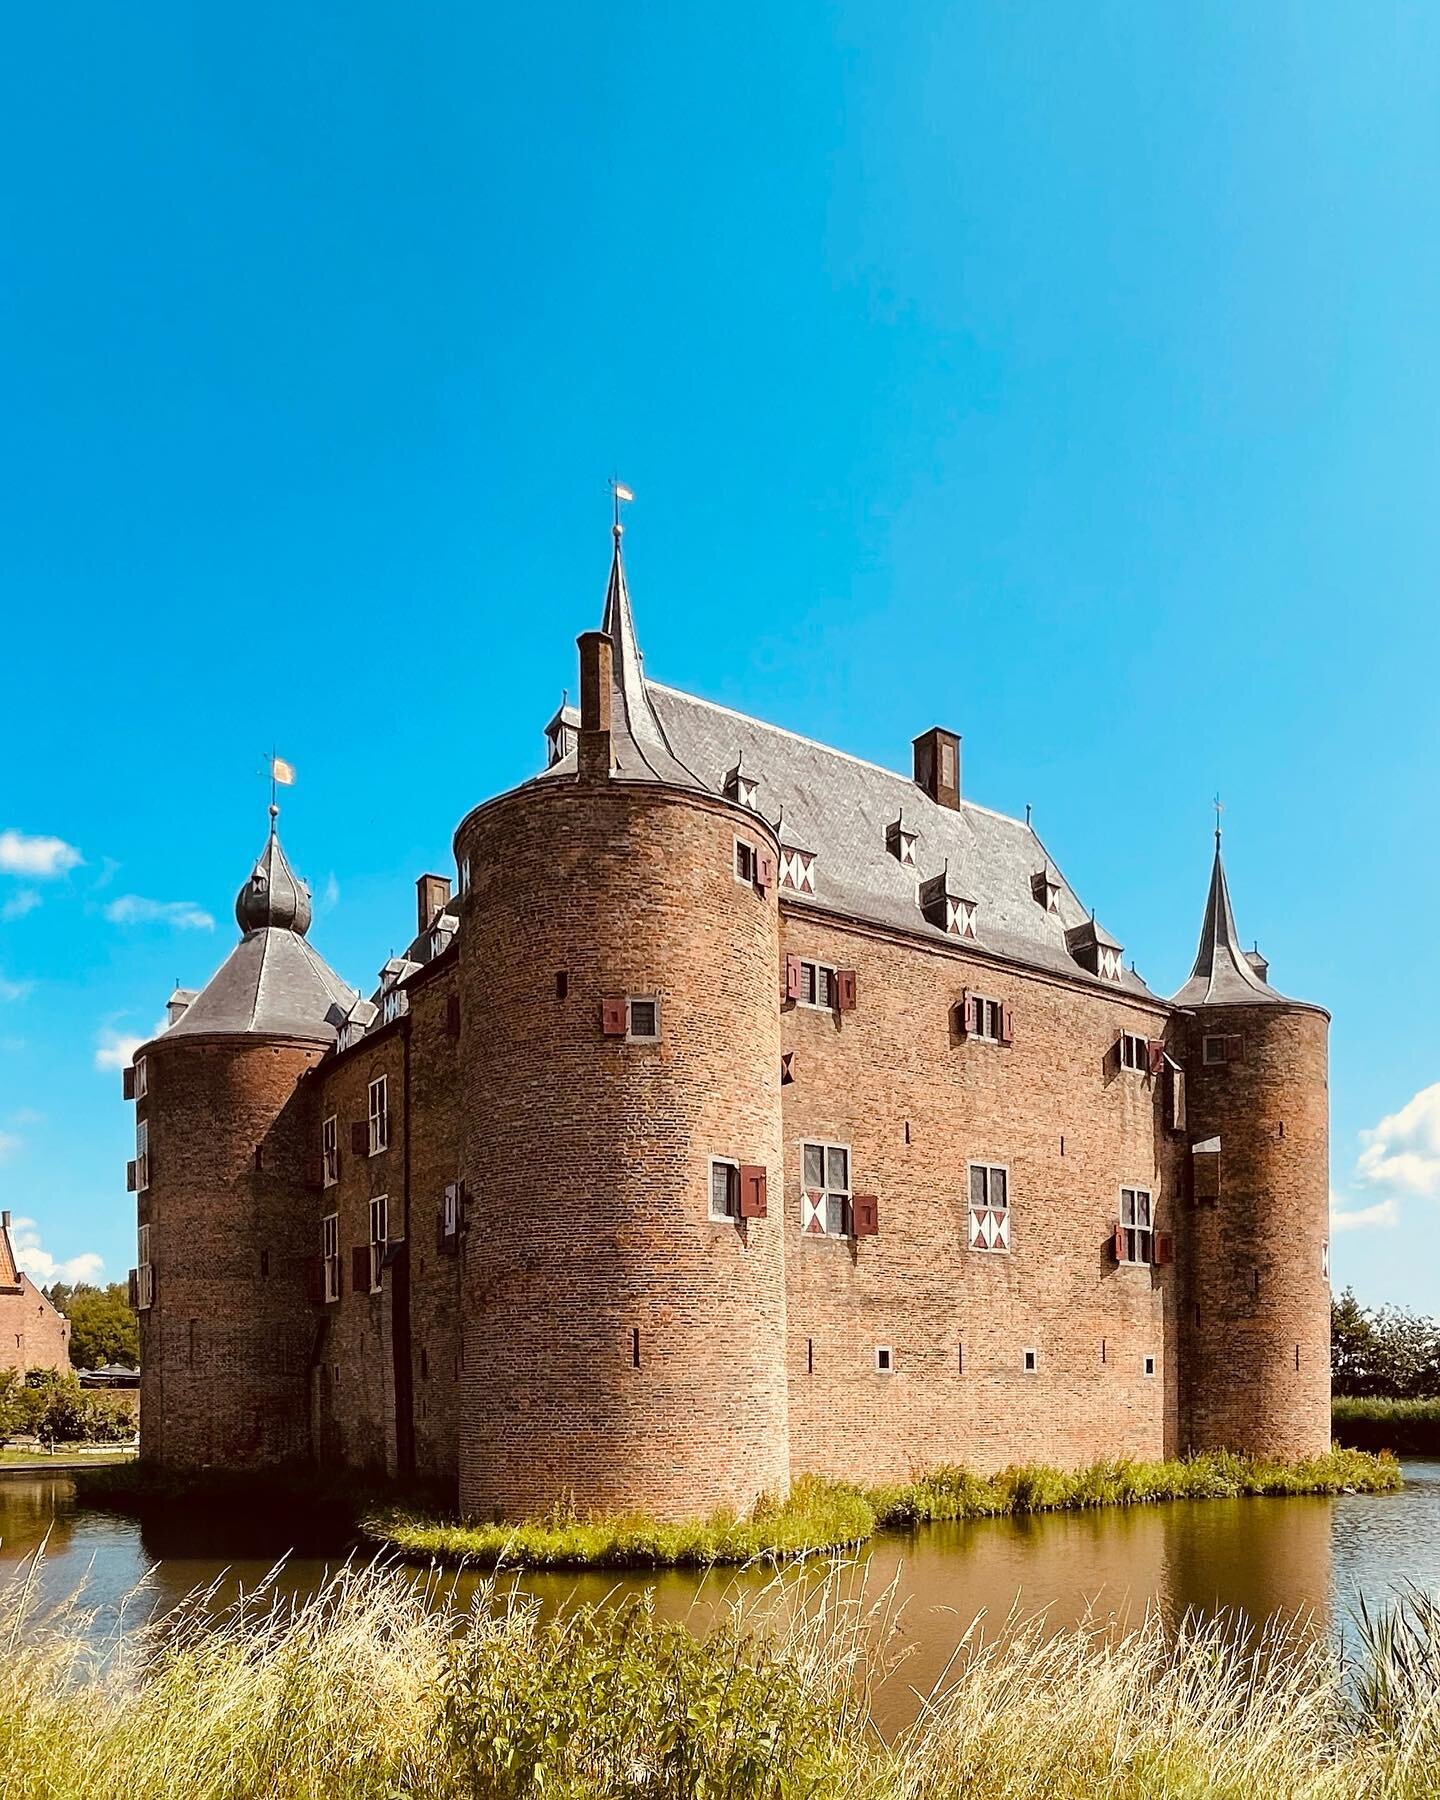 Castle Ammersoyen is surely one of the most imposing and pretty castles in The Netherlands! 
The building of it was completed in the 14th century so it&rsquo;s a proper medieval castle and a great place to visit.
.
#castles #medieval #travelblogger #